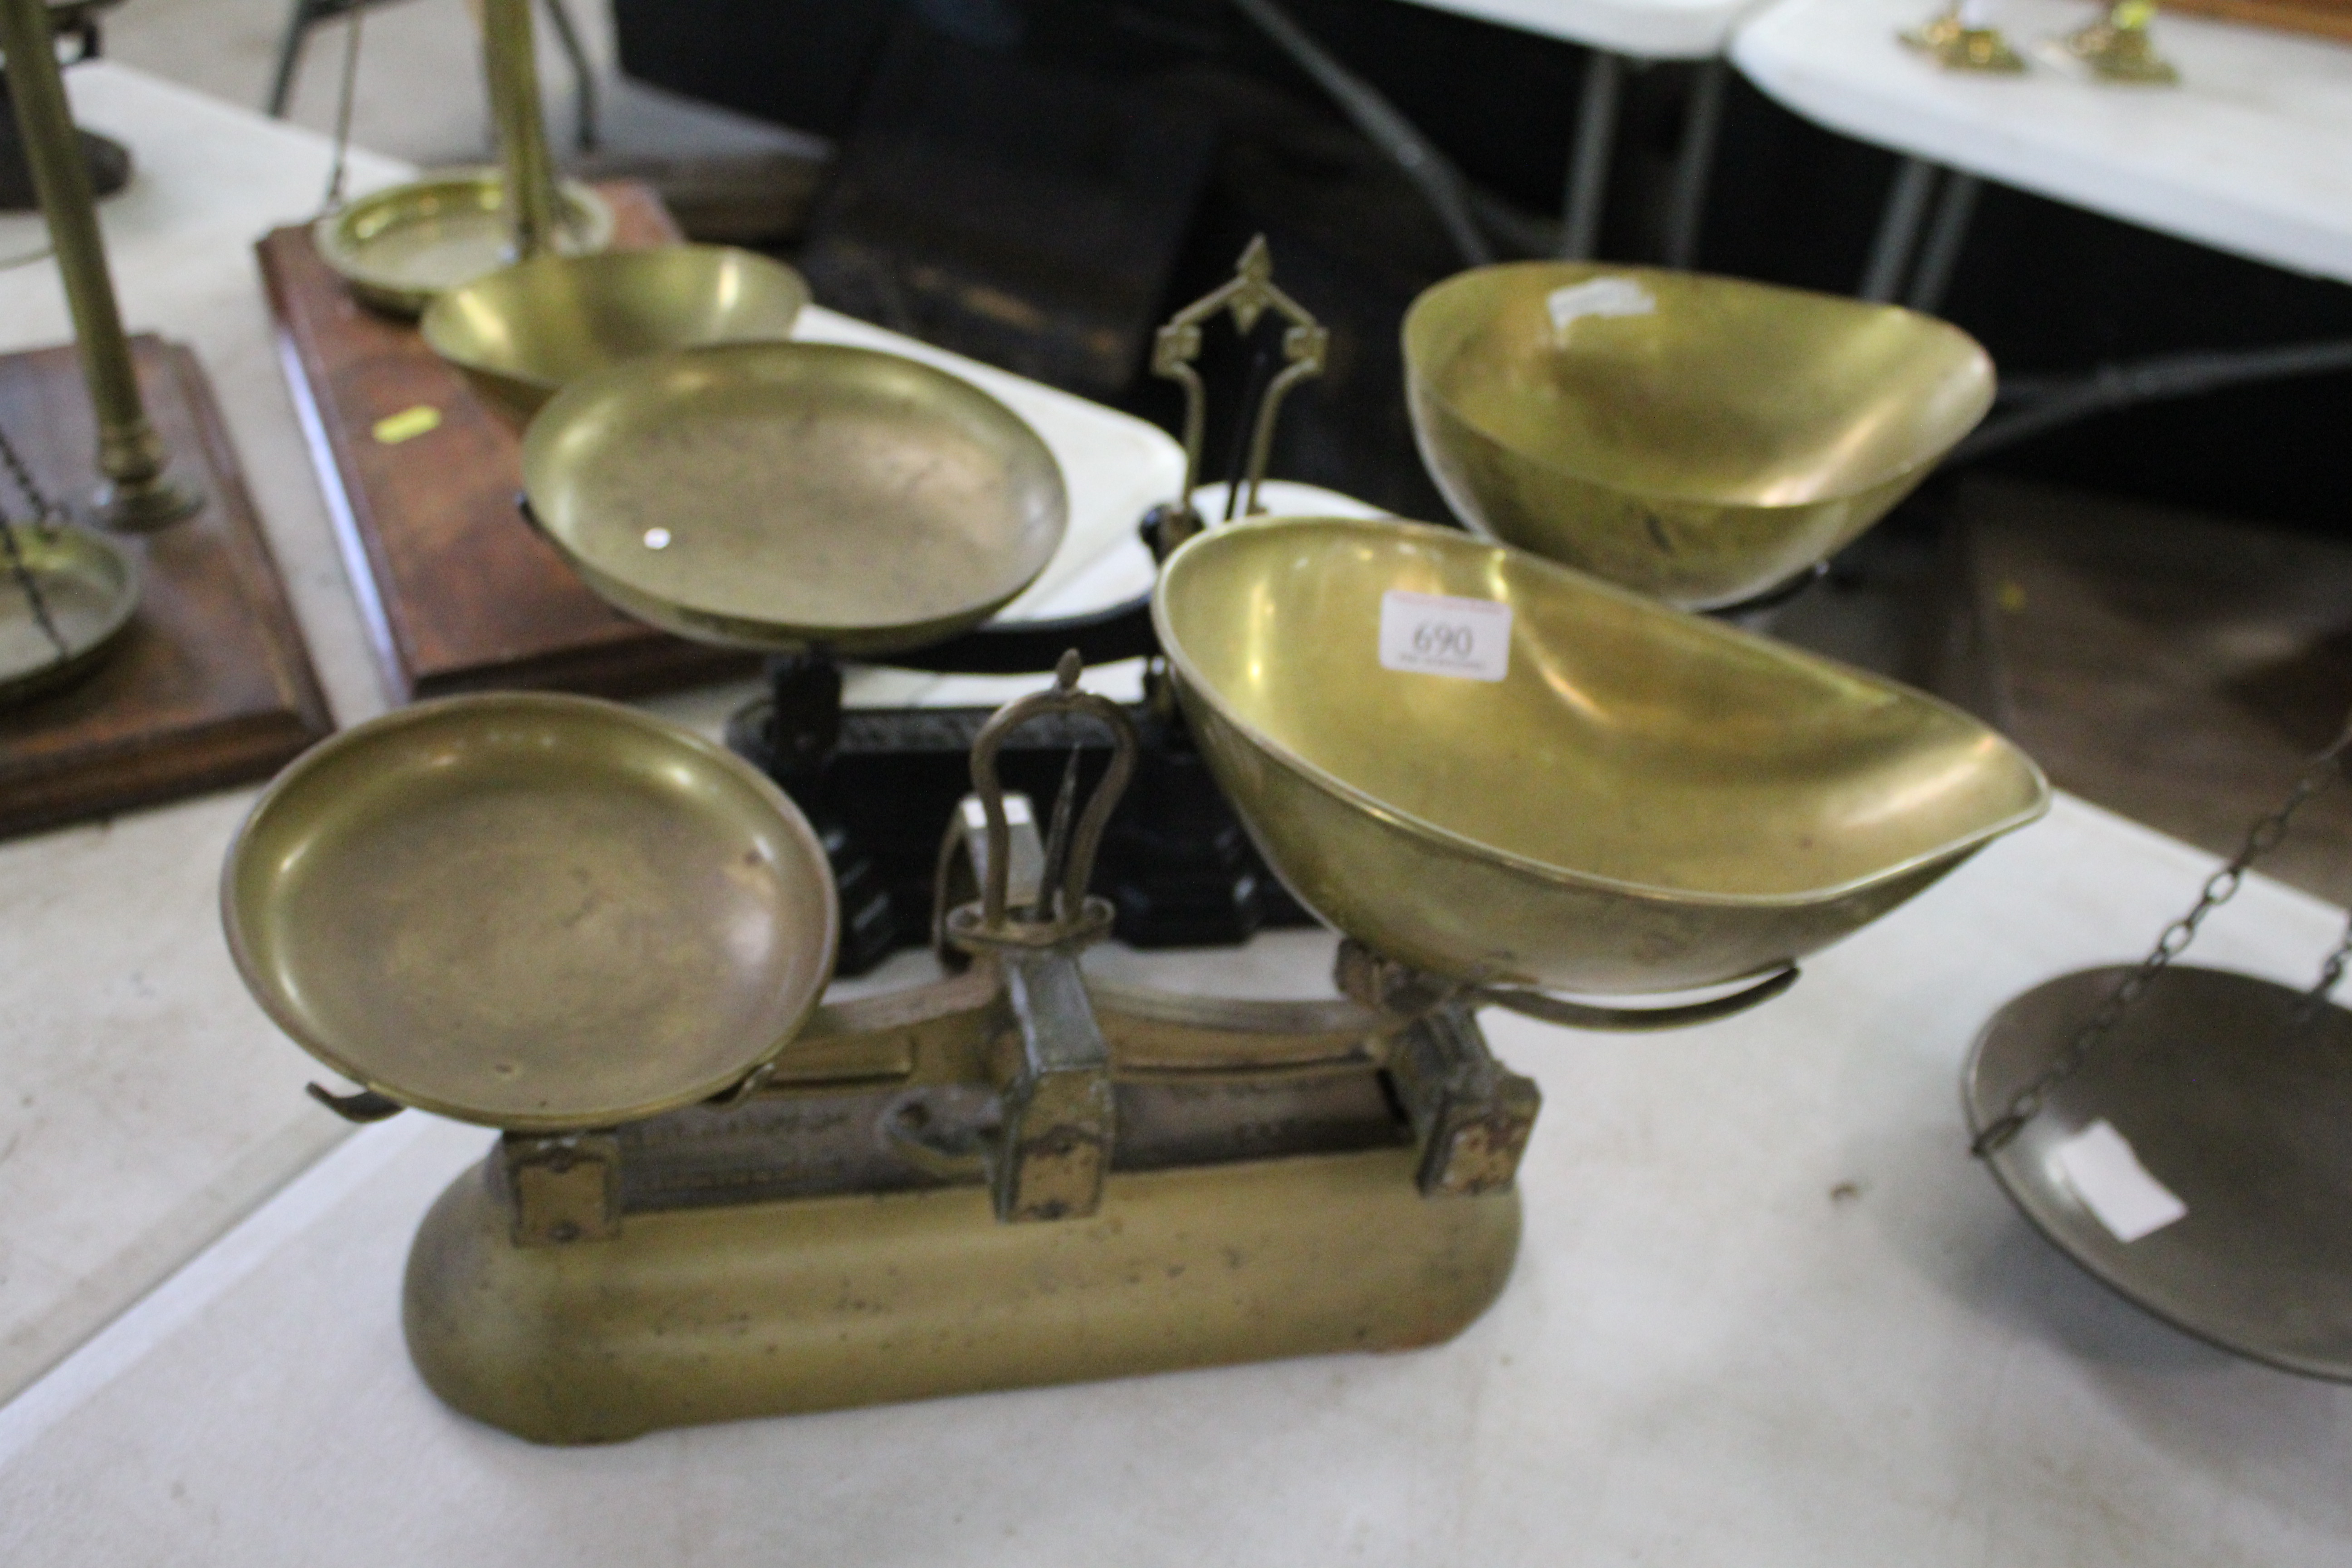 Two sets of W & T Avery domestic scales with brass